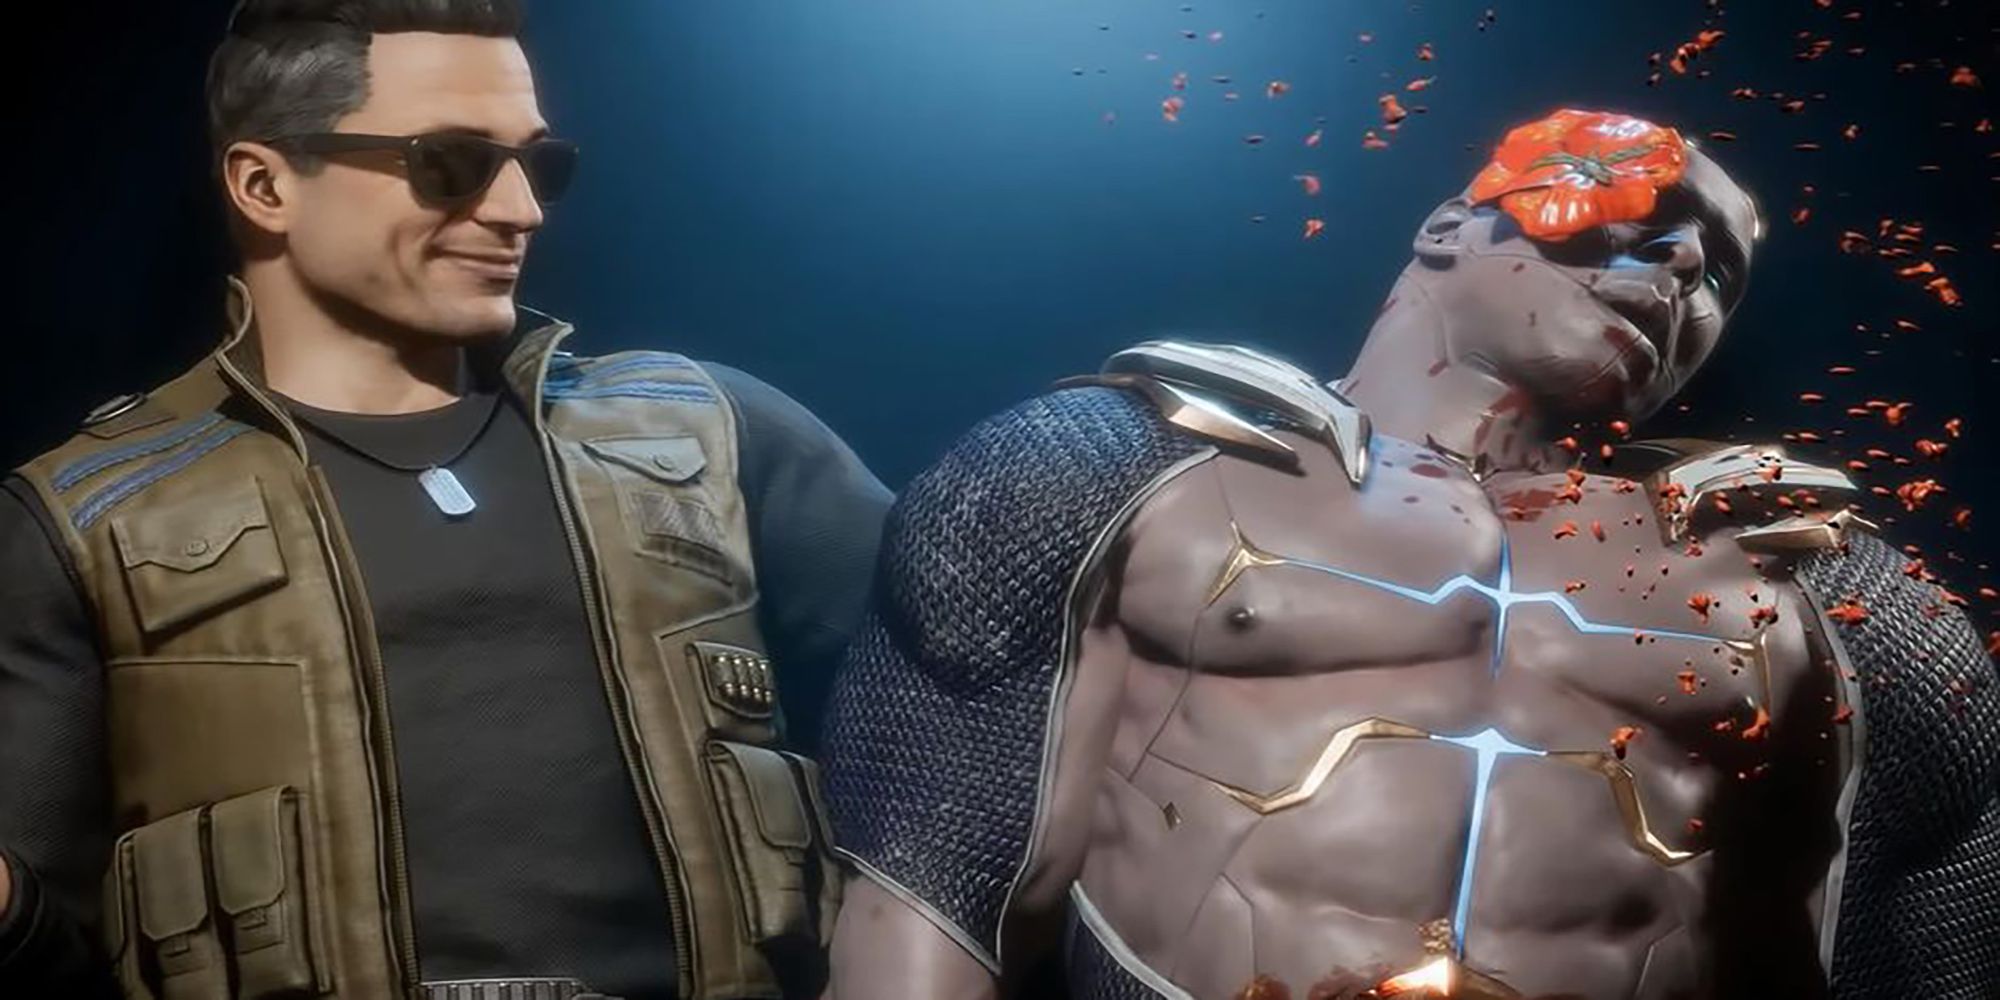 Johnny Cage plays with ventriloquist humor with Geras's corpse in Mortal Kombat 11